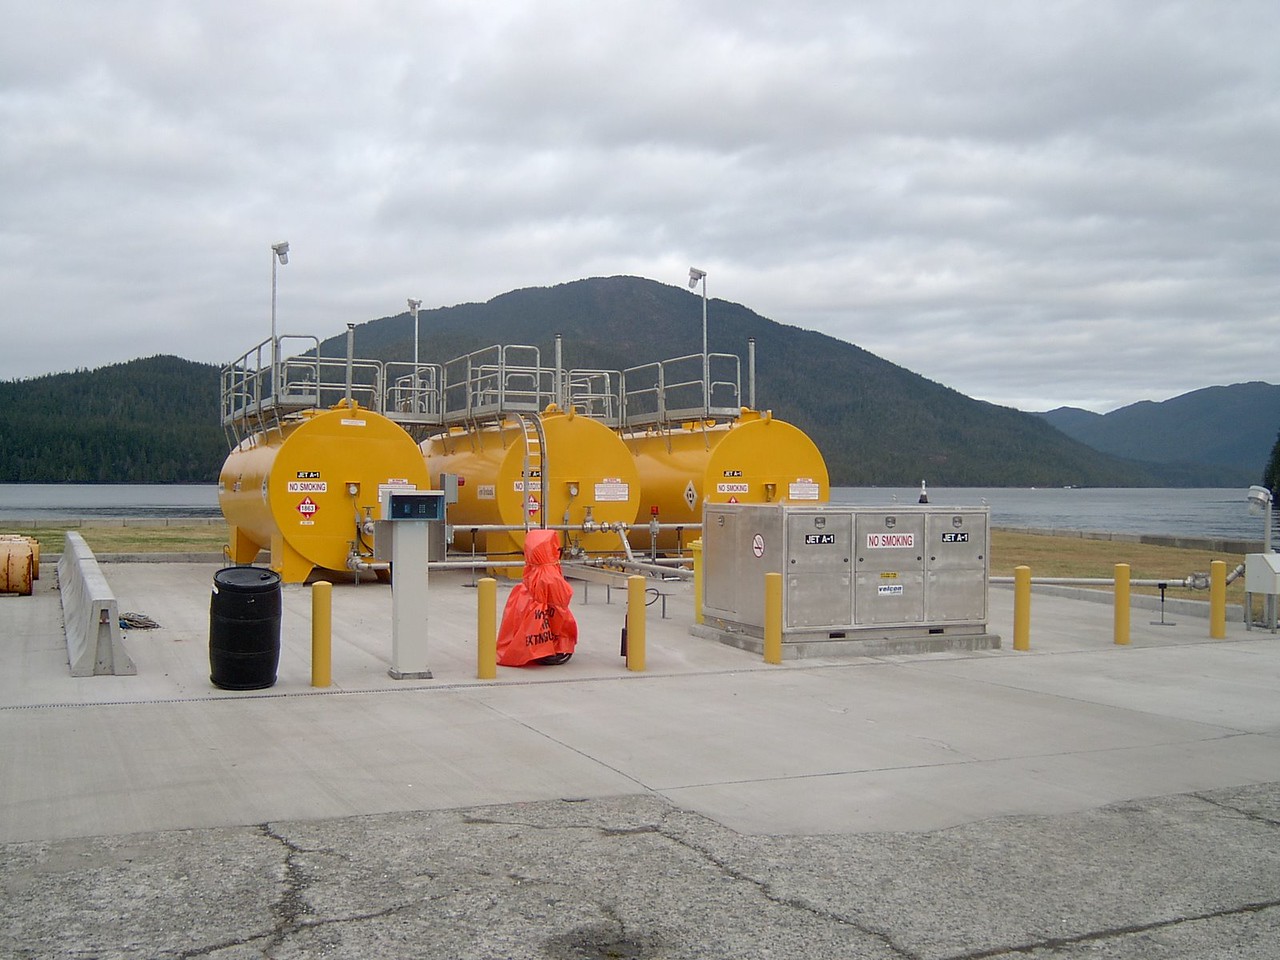 A large yellow tanks on a concrete surface.